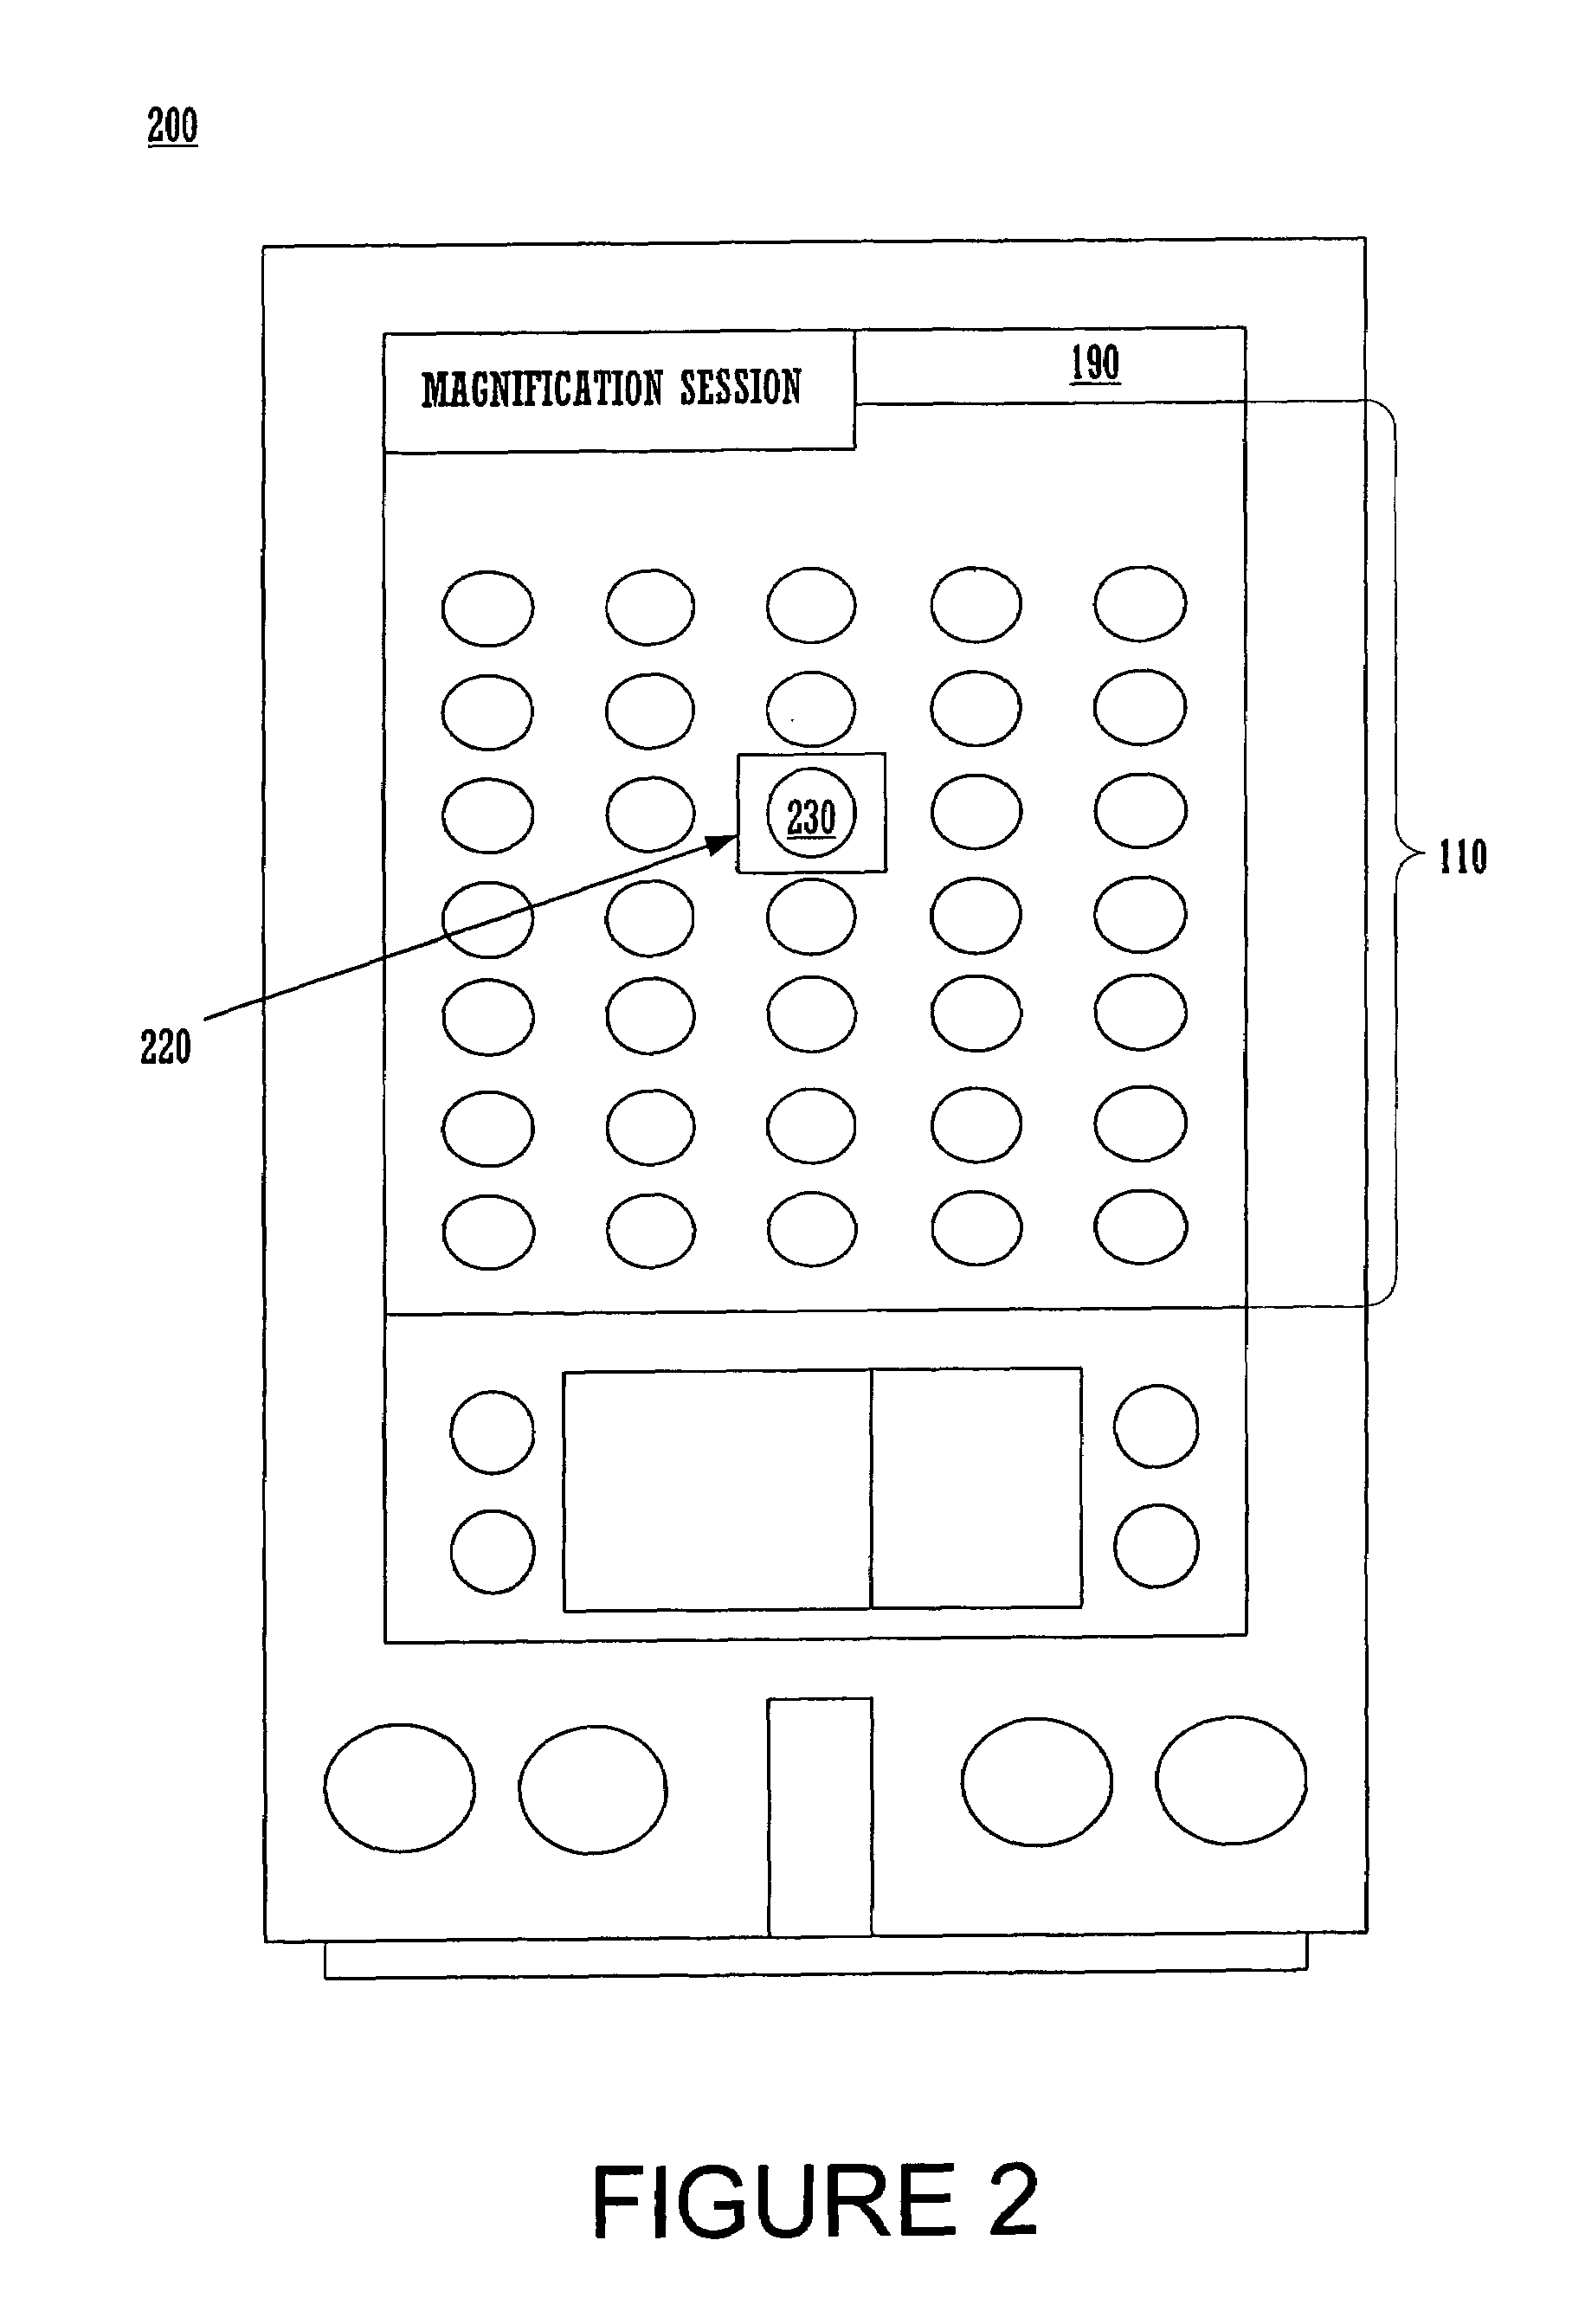 Method and system for navigating a display screen for locating a desired item of information